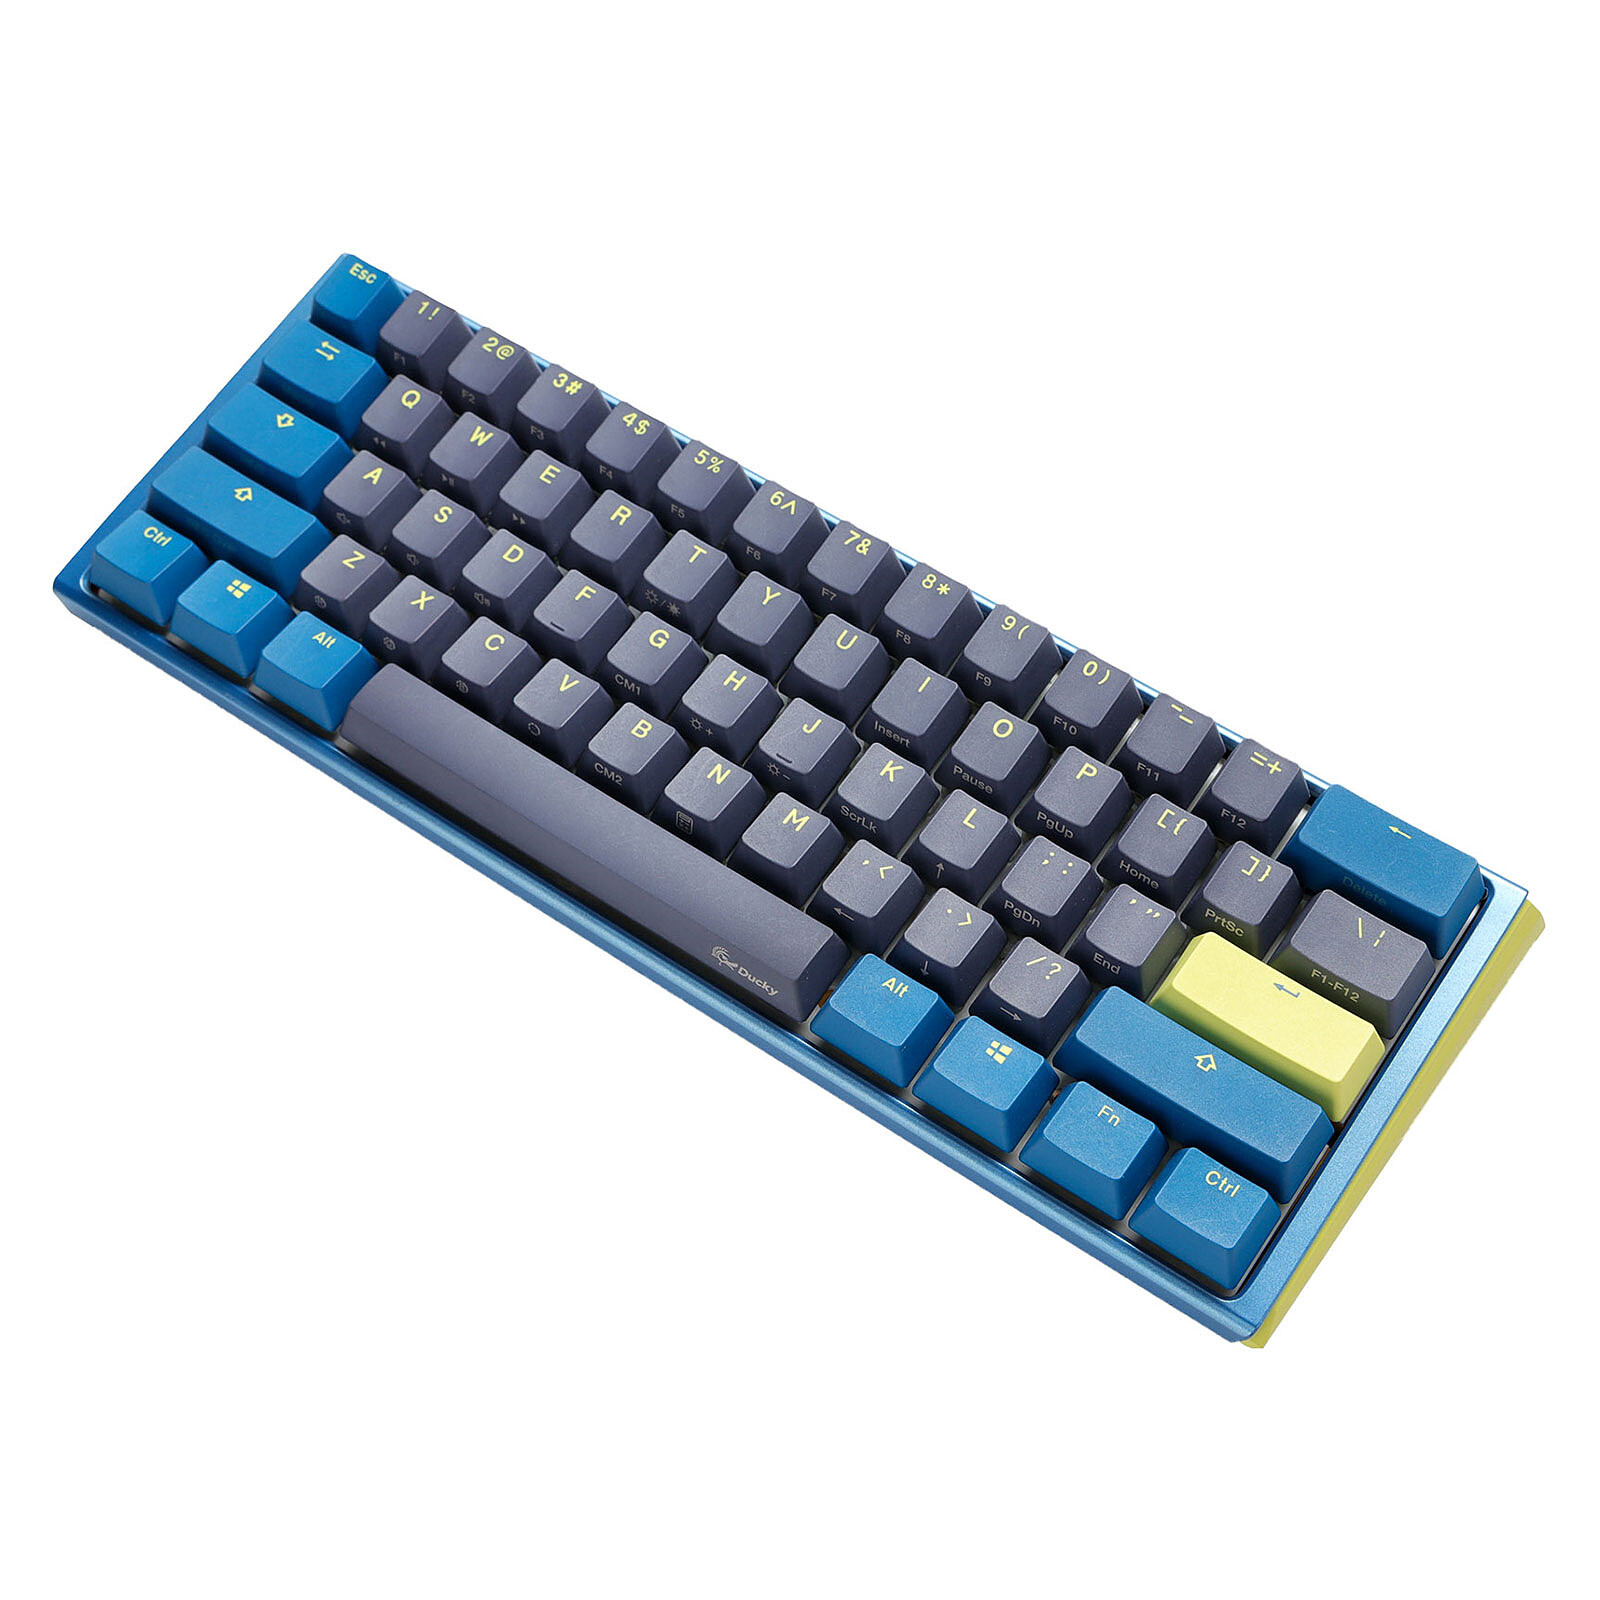 Ducky Channel One TKL RGB (coloris blanc - MX RGB Brown - touches ABS) -  Clavier PC - Garantie 3 ans LDLC